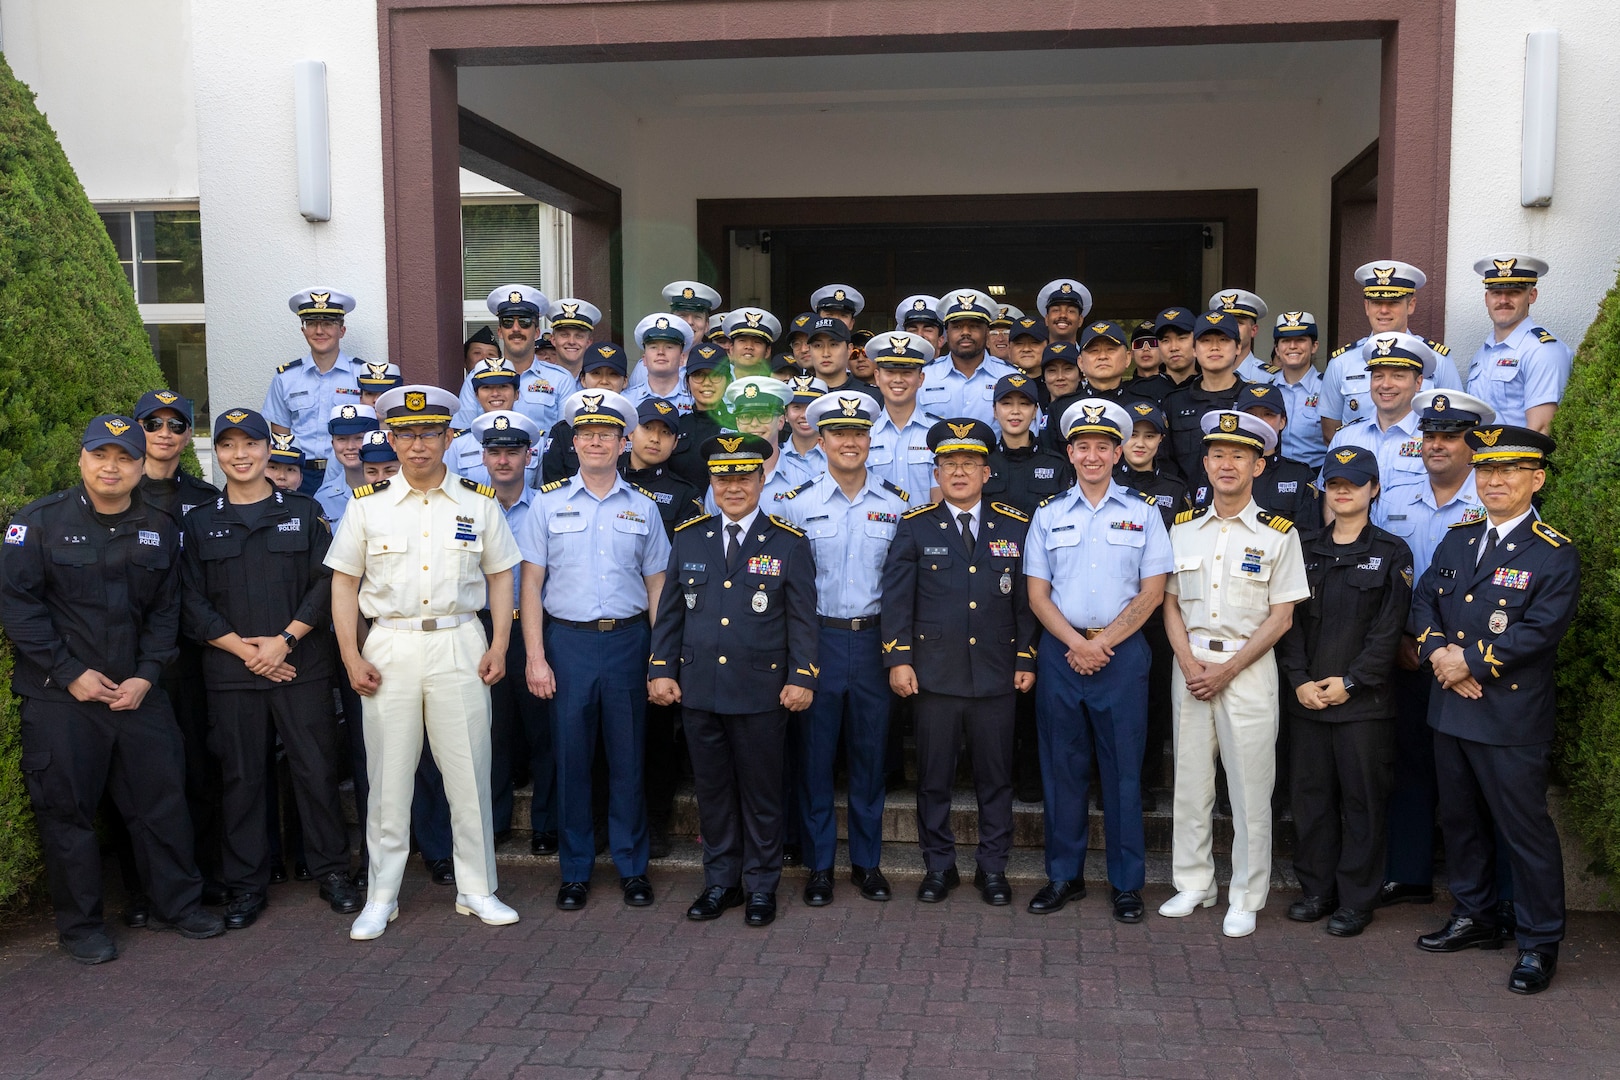 U.S. Coast Guardsmen assigned to the U.S. Coast Guard Cutter Waesche (WMSL-751), members of the Republic of Korea Coast Guard, and members of the Japanese Coast Guard pose for a photo outside of the Japanese Coast Guard Training School in Maizuru, Japan, June 5, 2024. Members of the Japanese coast guard led U.S. and Republic of Korea Coast Guardsmen on a tour of the facilities at the training school and some of the curriculum taught there. Waesche is deployed to the Indo-Pacific to advance relationships with ally and partner nations to build a more stable, free, open and resilient region with unrestricted, lawful access to the Maritime Commons. (U.S. Marine Corps photo by Cpl. Elijah Murphy)